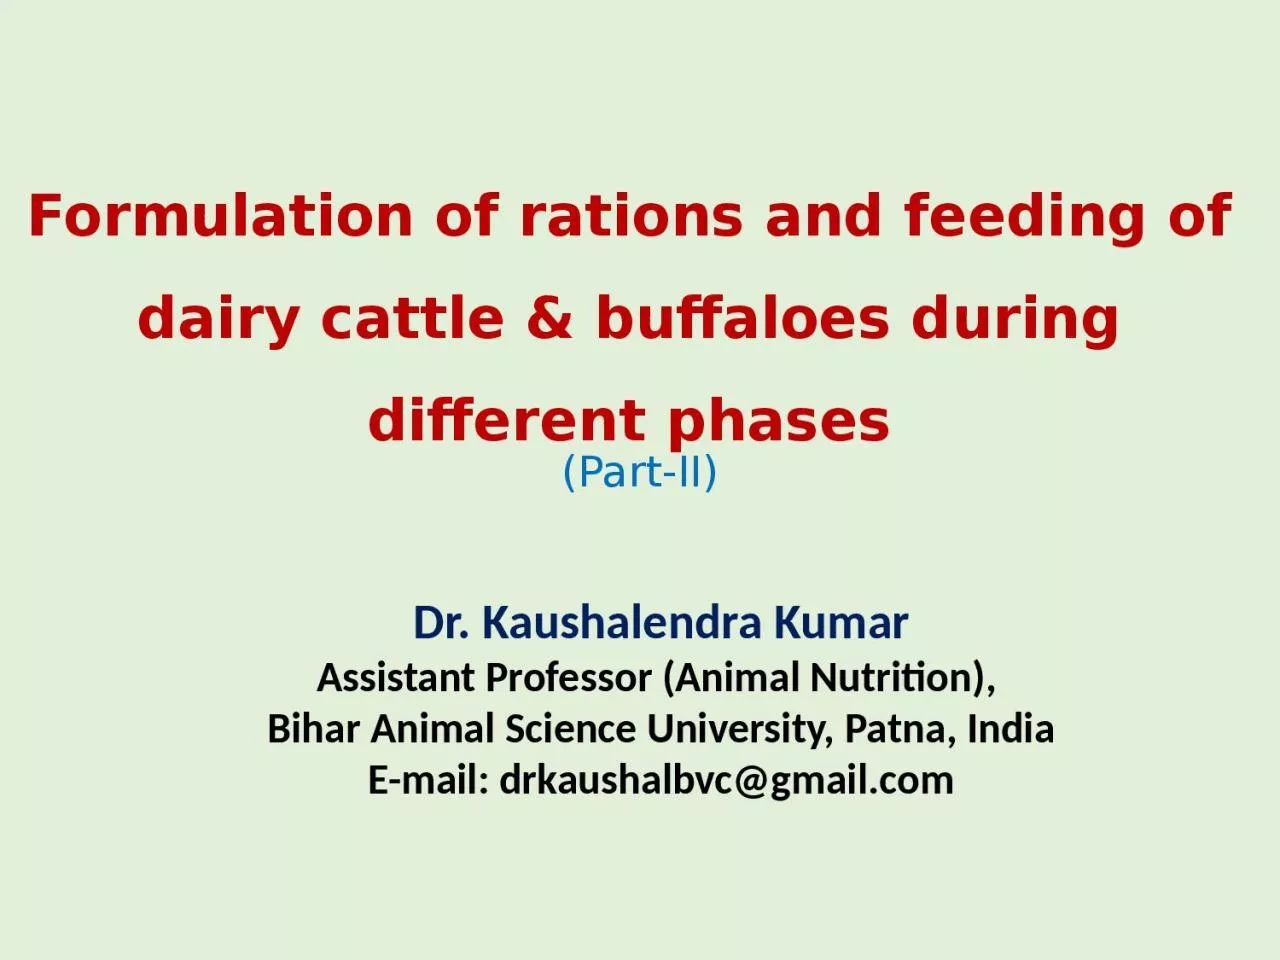 Formulation of rations and feeding of dairy cattle & buffaloes during different phases